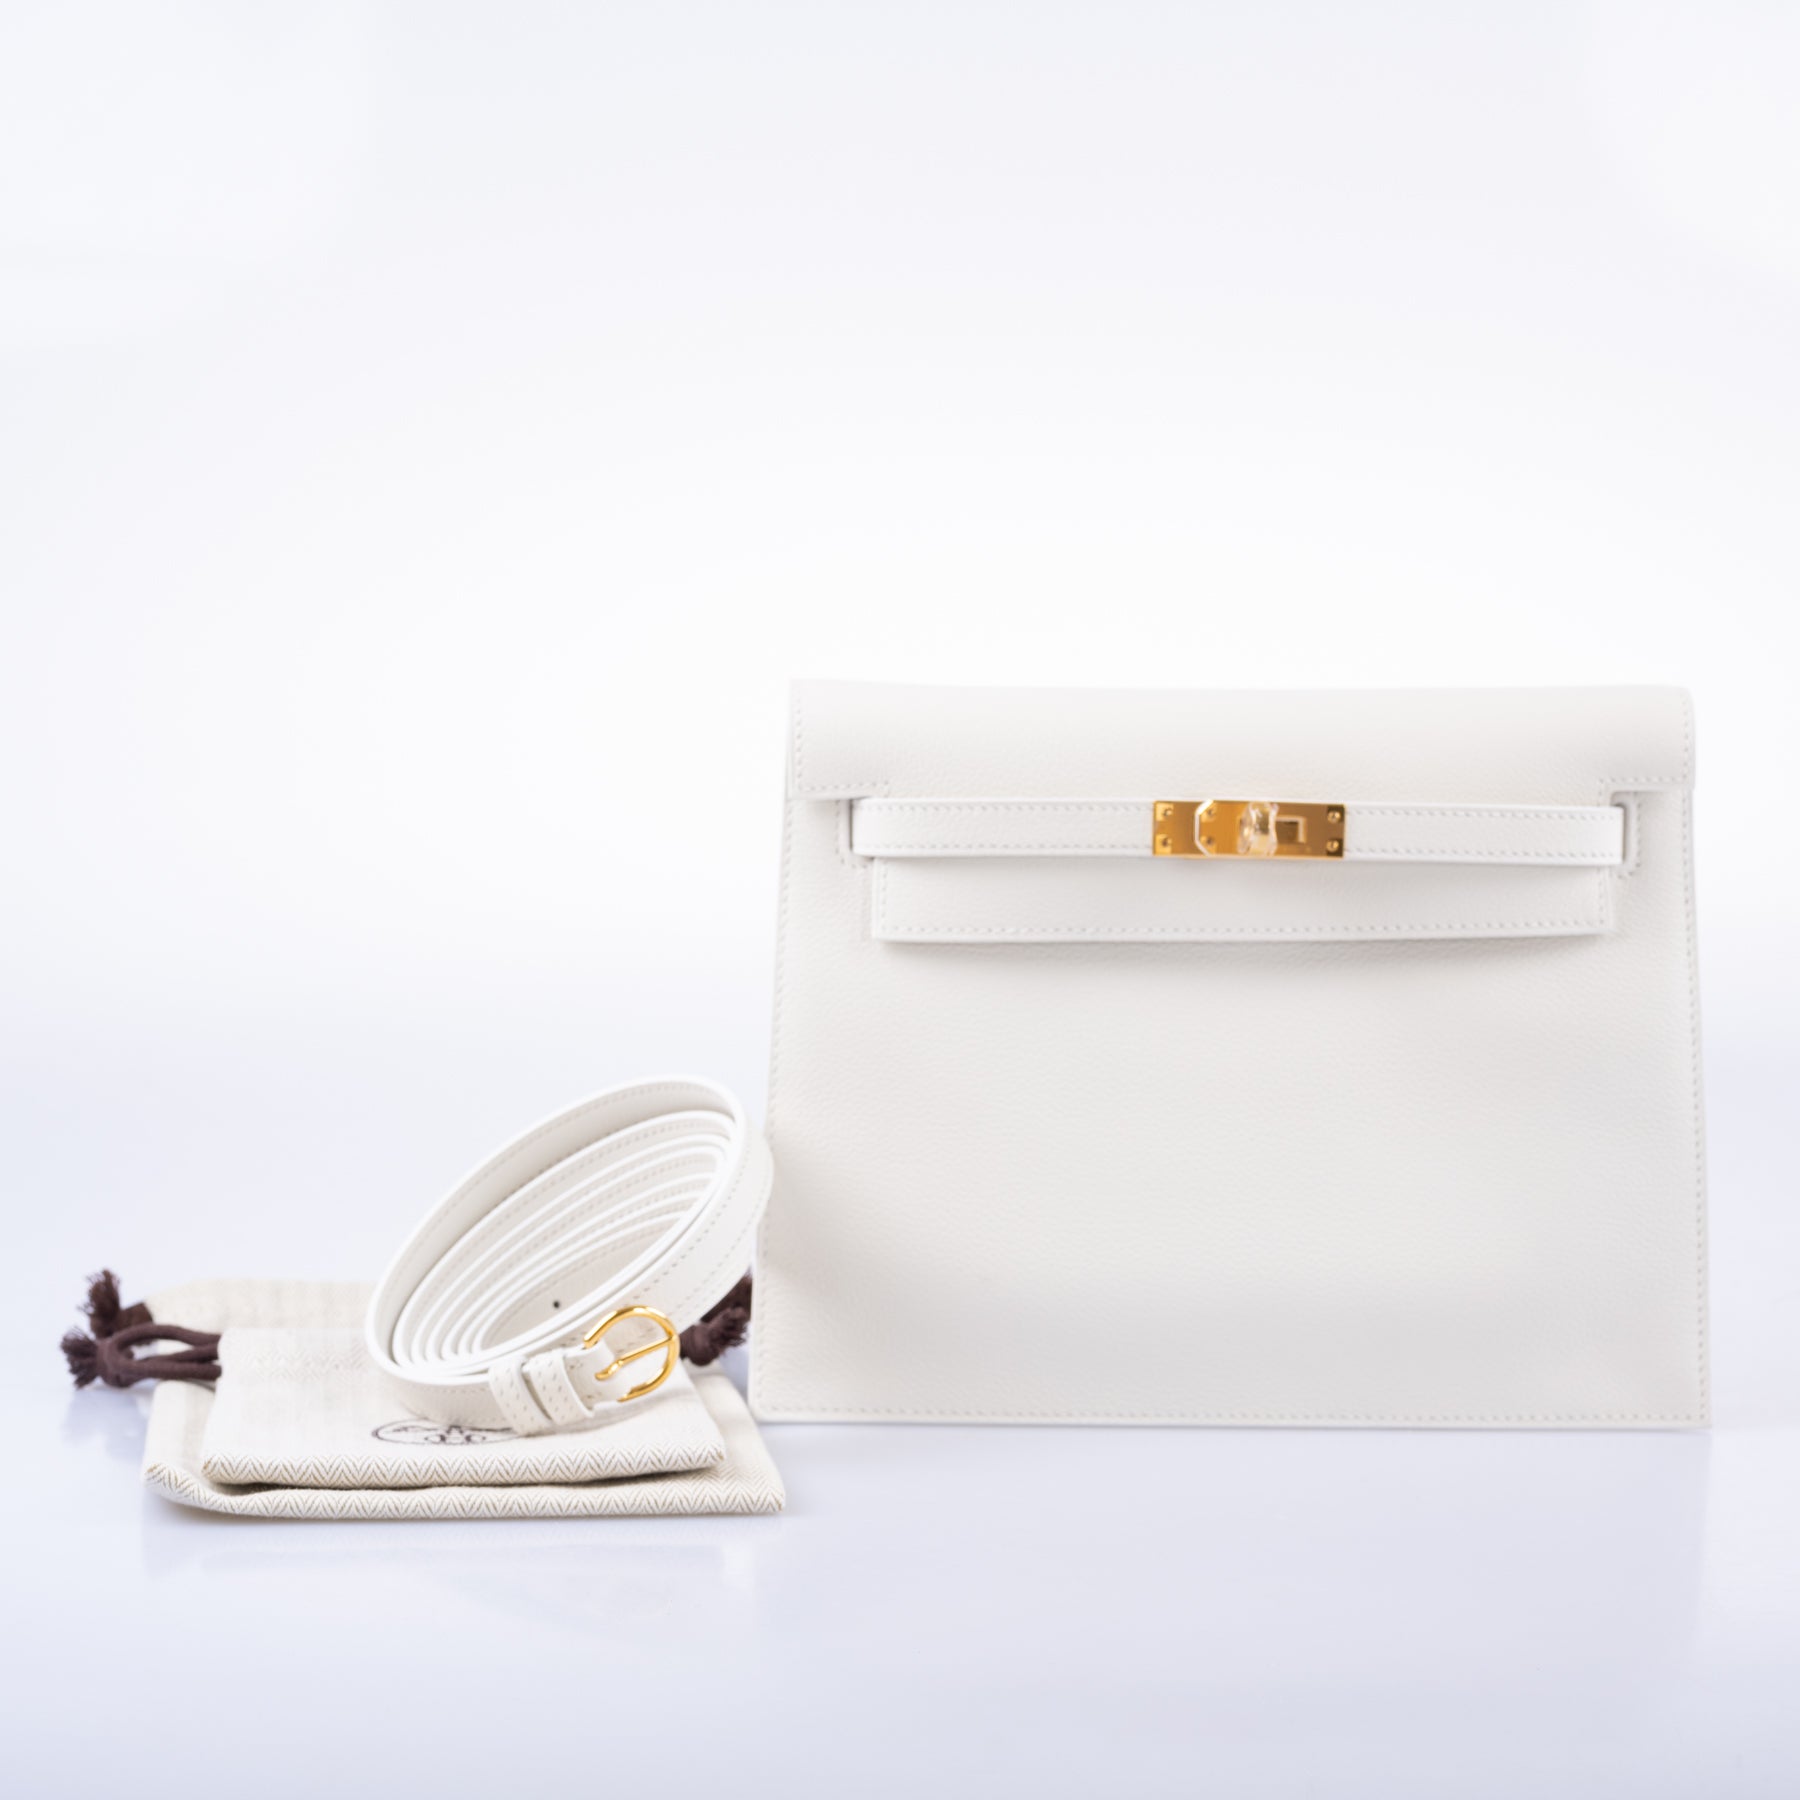 Hermès Kelly Danse II White Evercolor leather with Gold Hardware